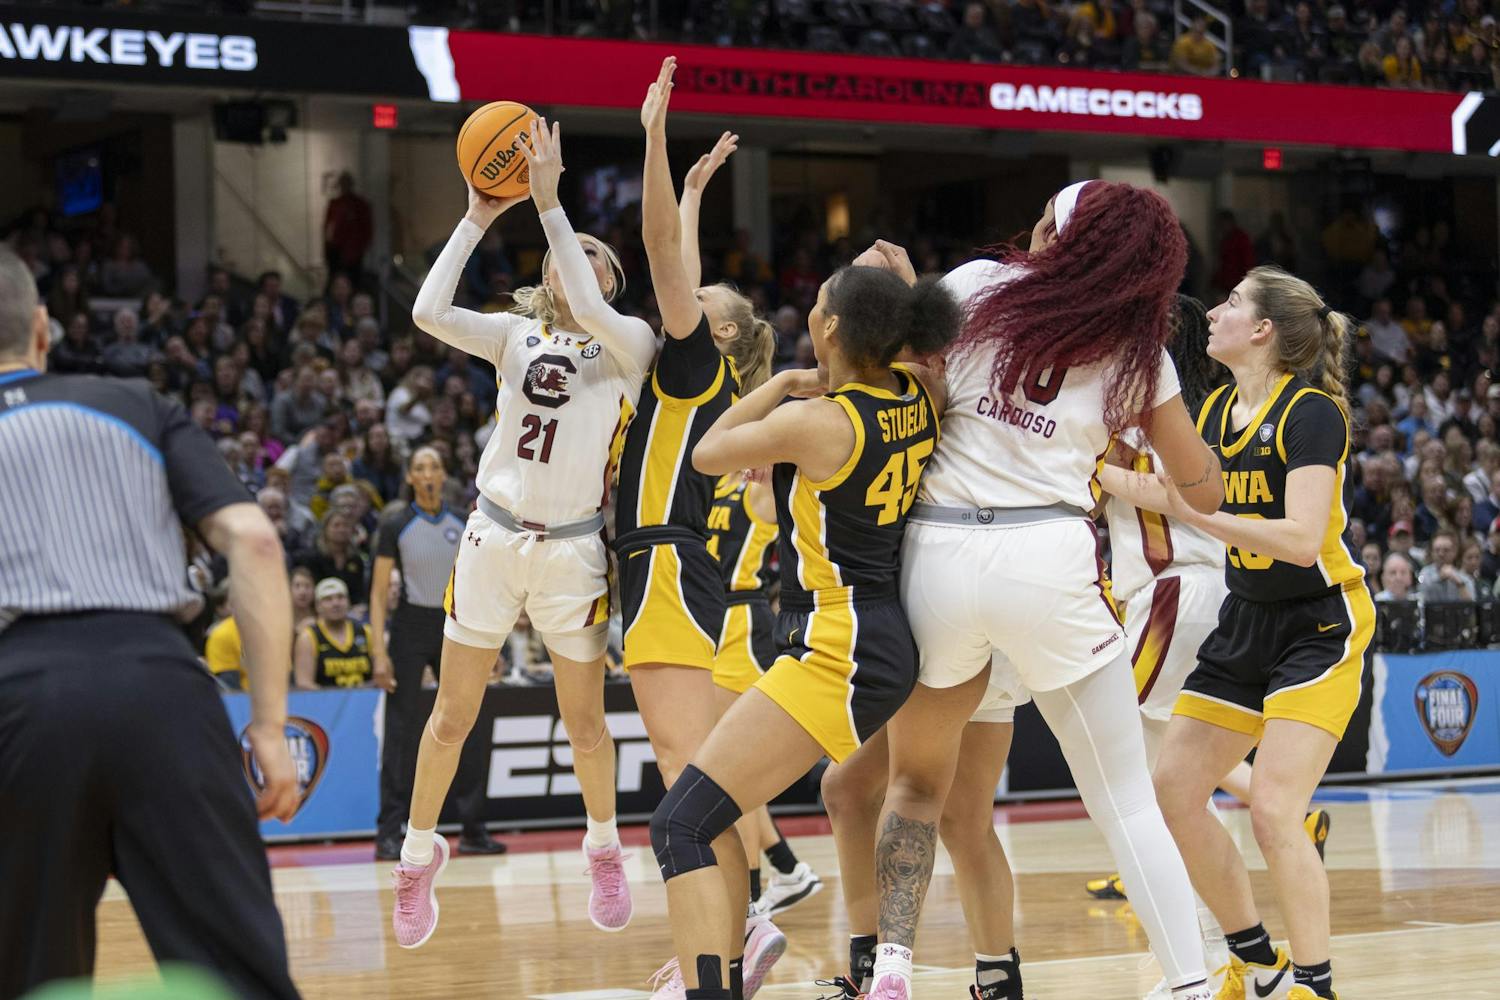 Sophomore forward Chloe Kitts attempts a layup as the Gamecocks earn a national championship by defeating the Iowa Hawkeyes 87-75.